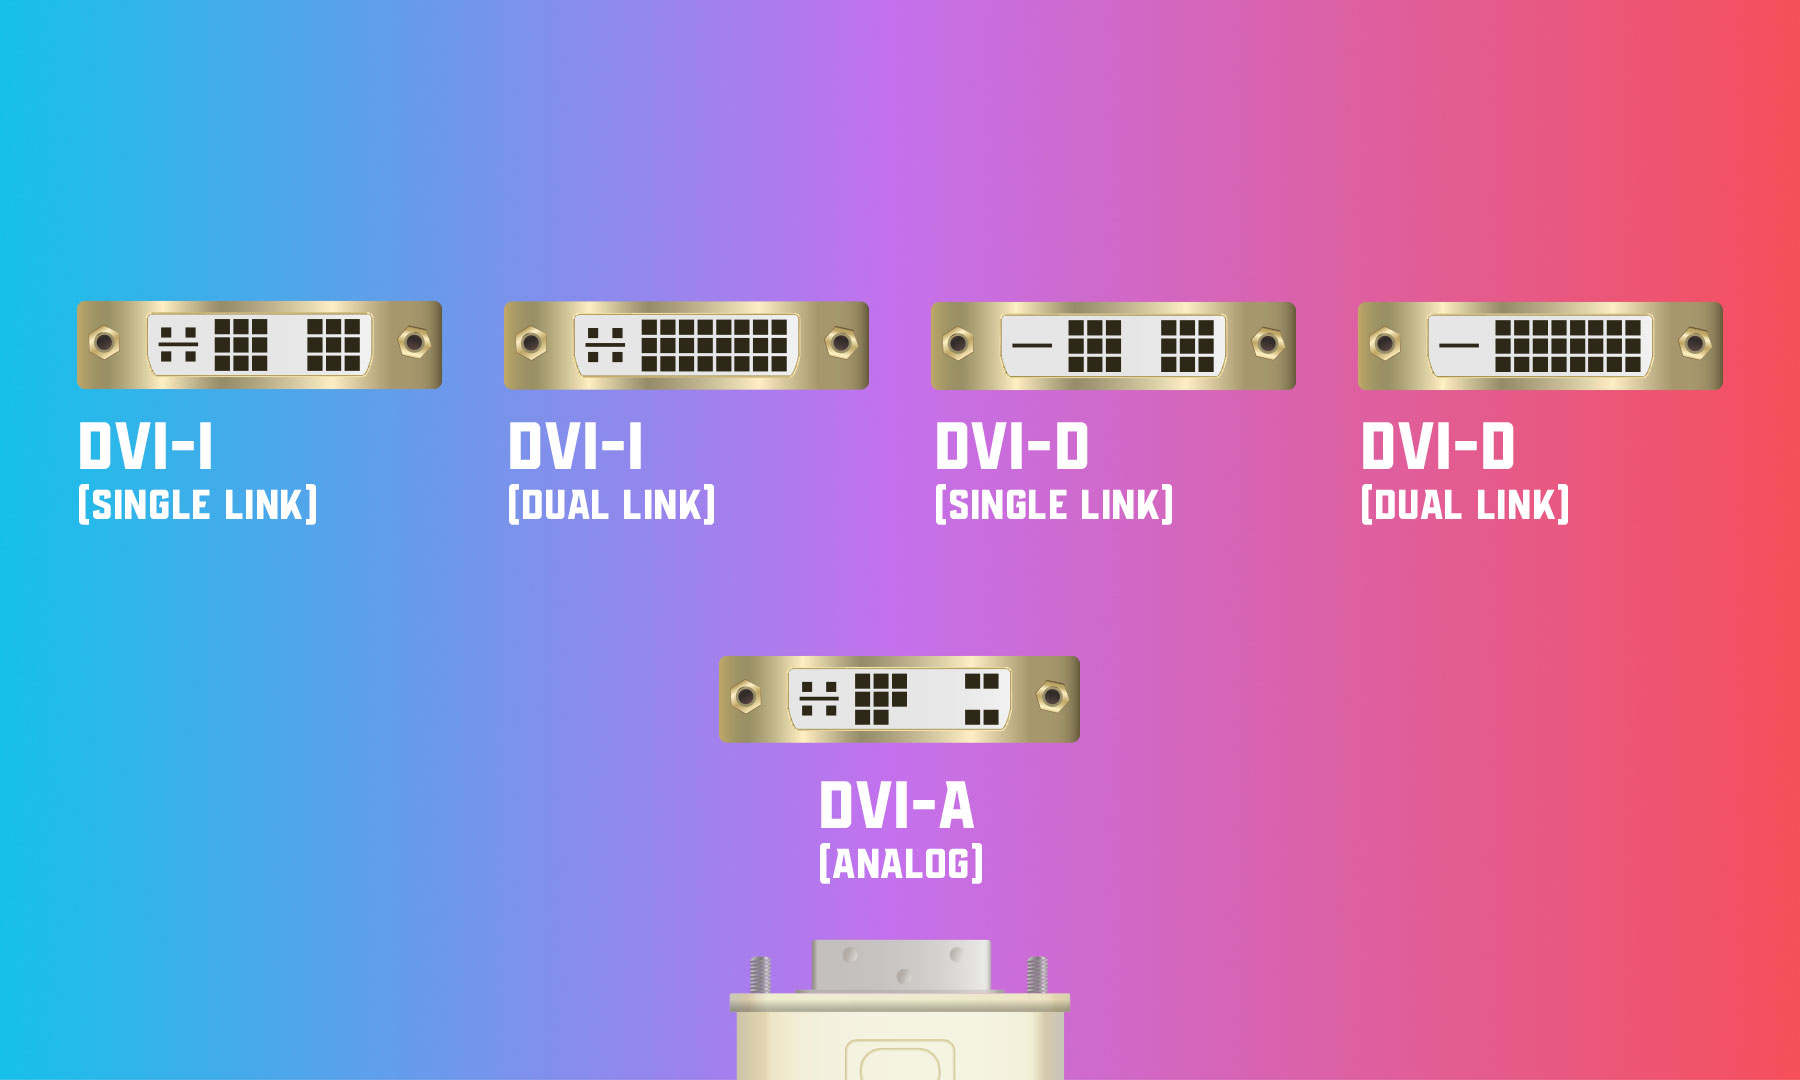 What’s The Difference Between DVI-I and DVI-D?